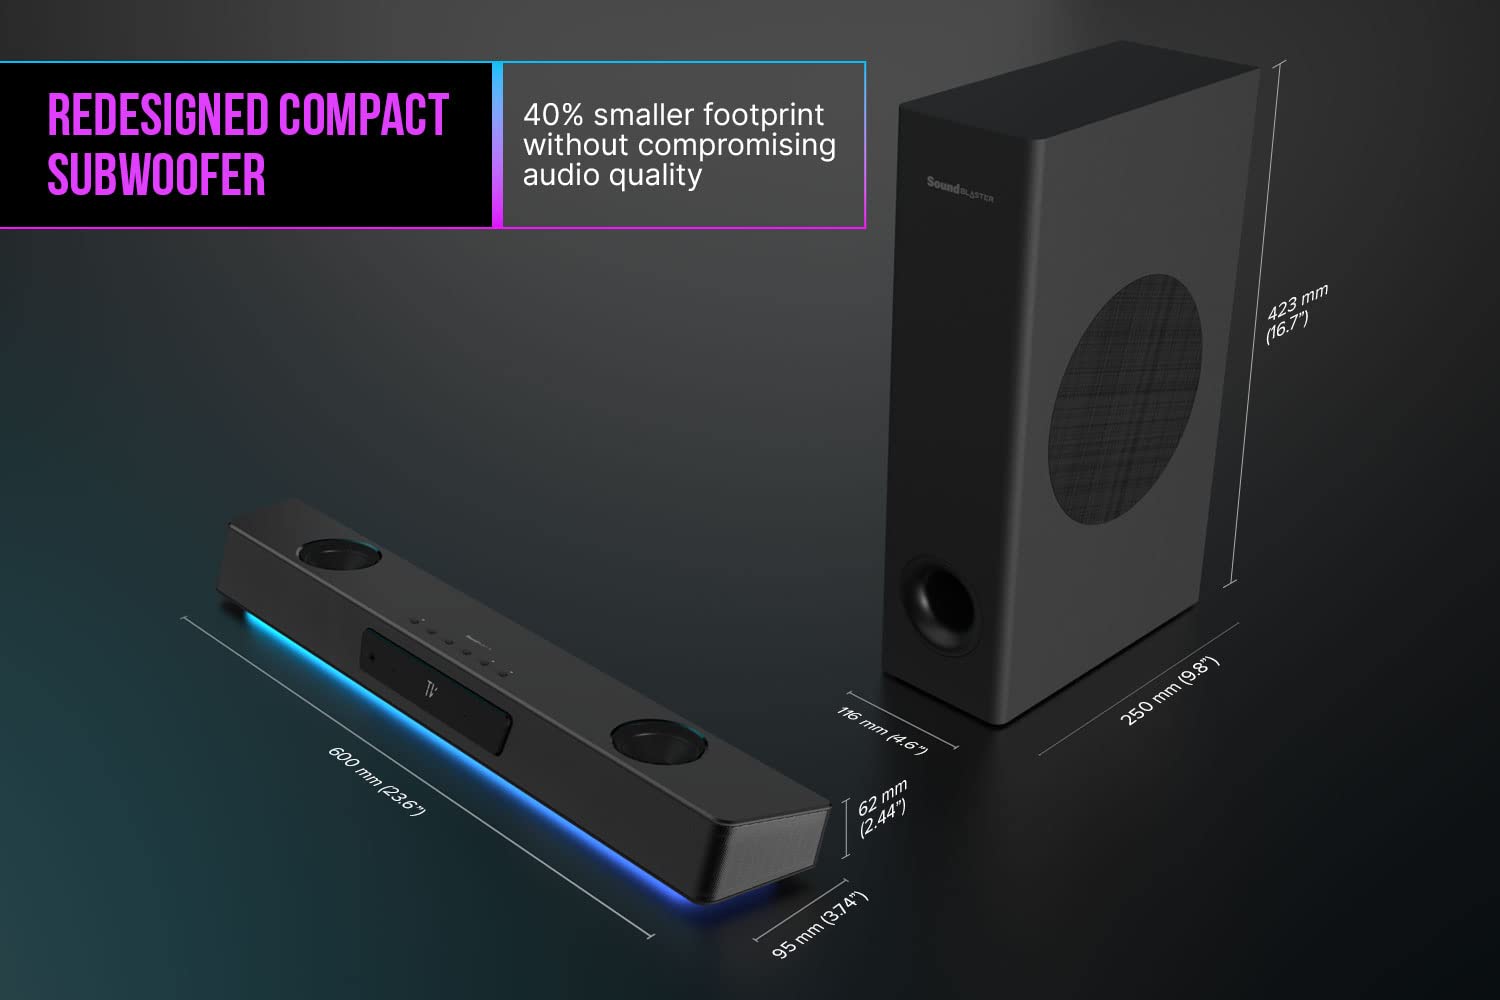 Creative Sound Blaster Katana V2X 5.1 Multi-Channel Gaming Soundbar with Compact Subwoofer, 180W Peak Power, ft Tri-Amplified 5-Driver Design, Super X-Fi Technology, and RGB Lighting